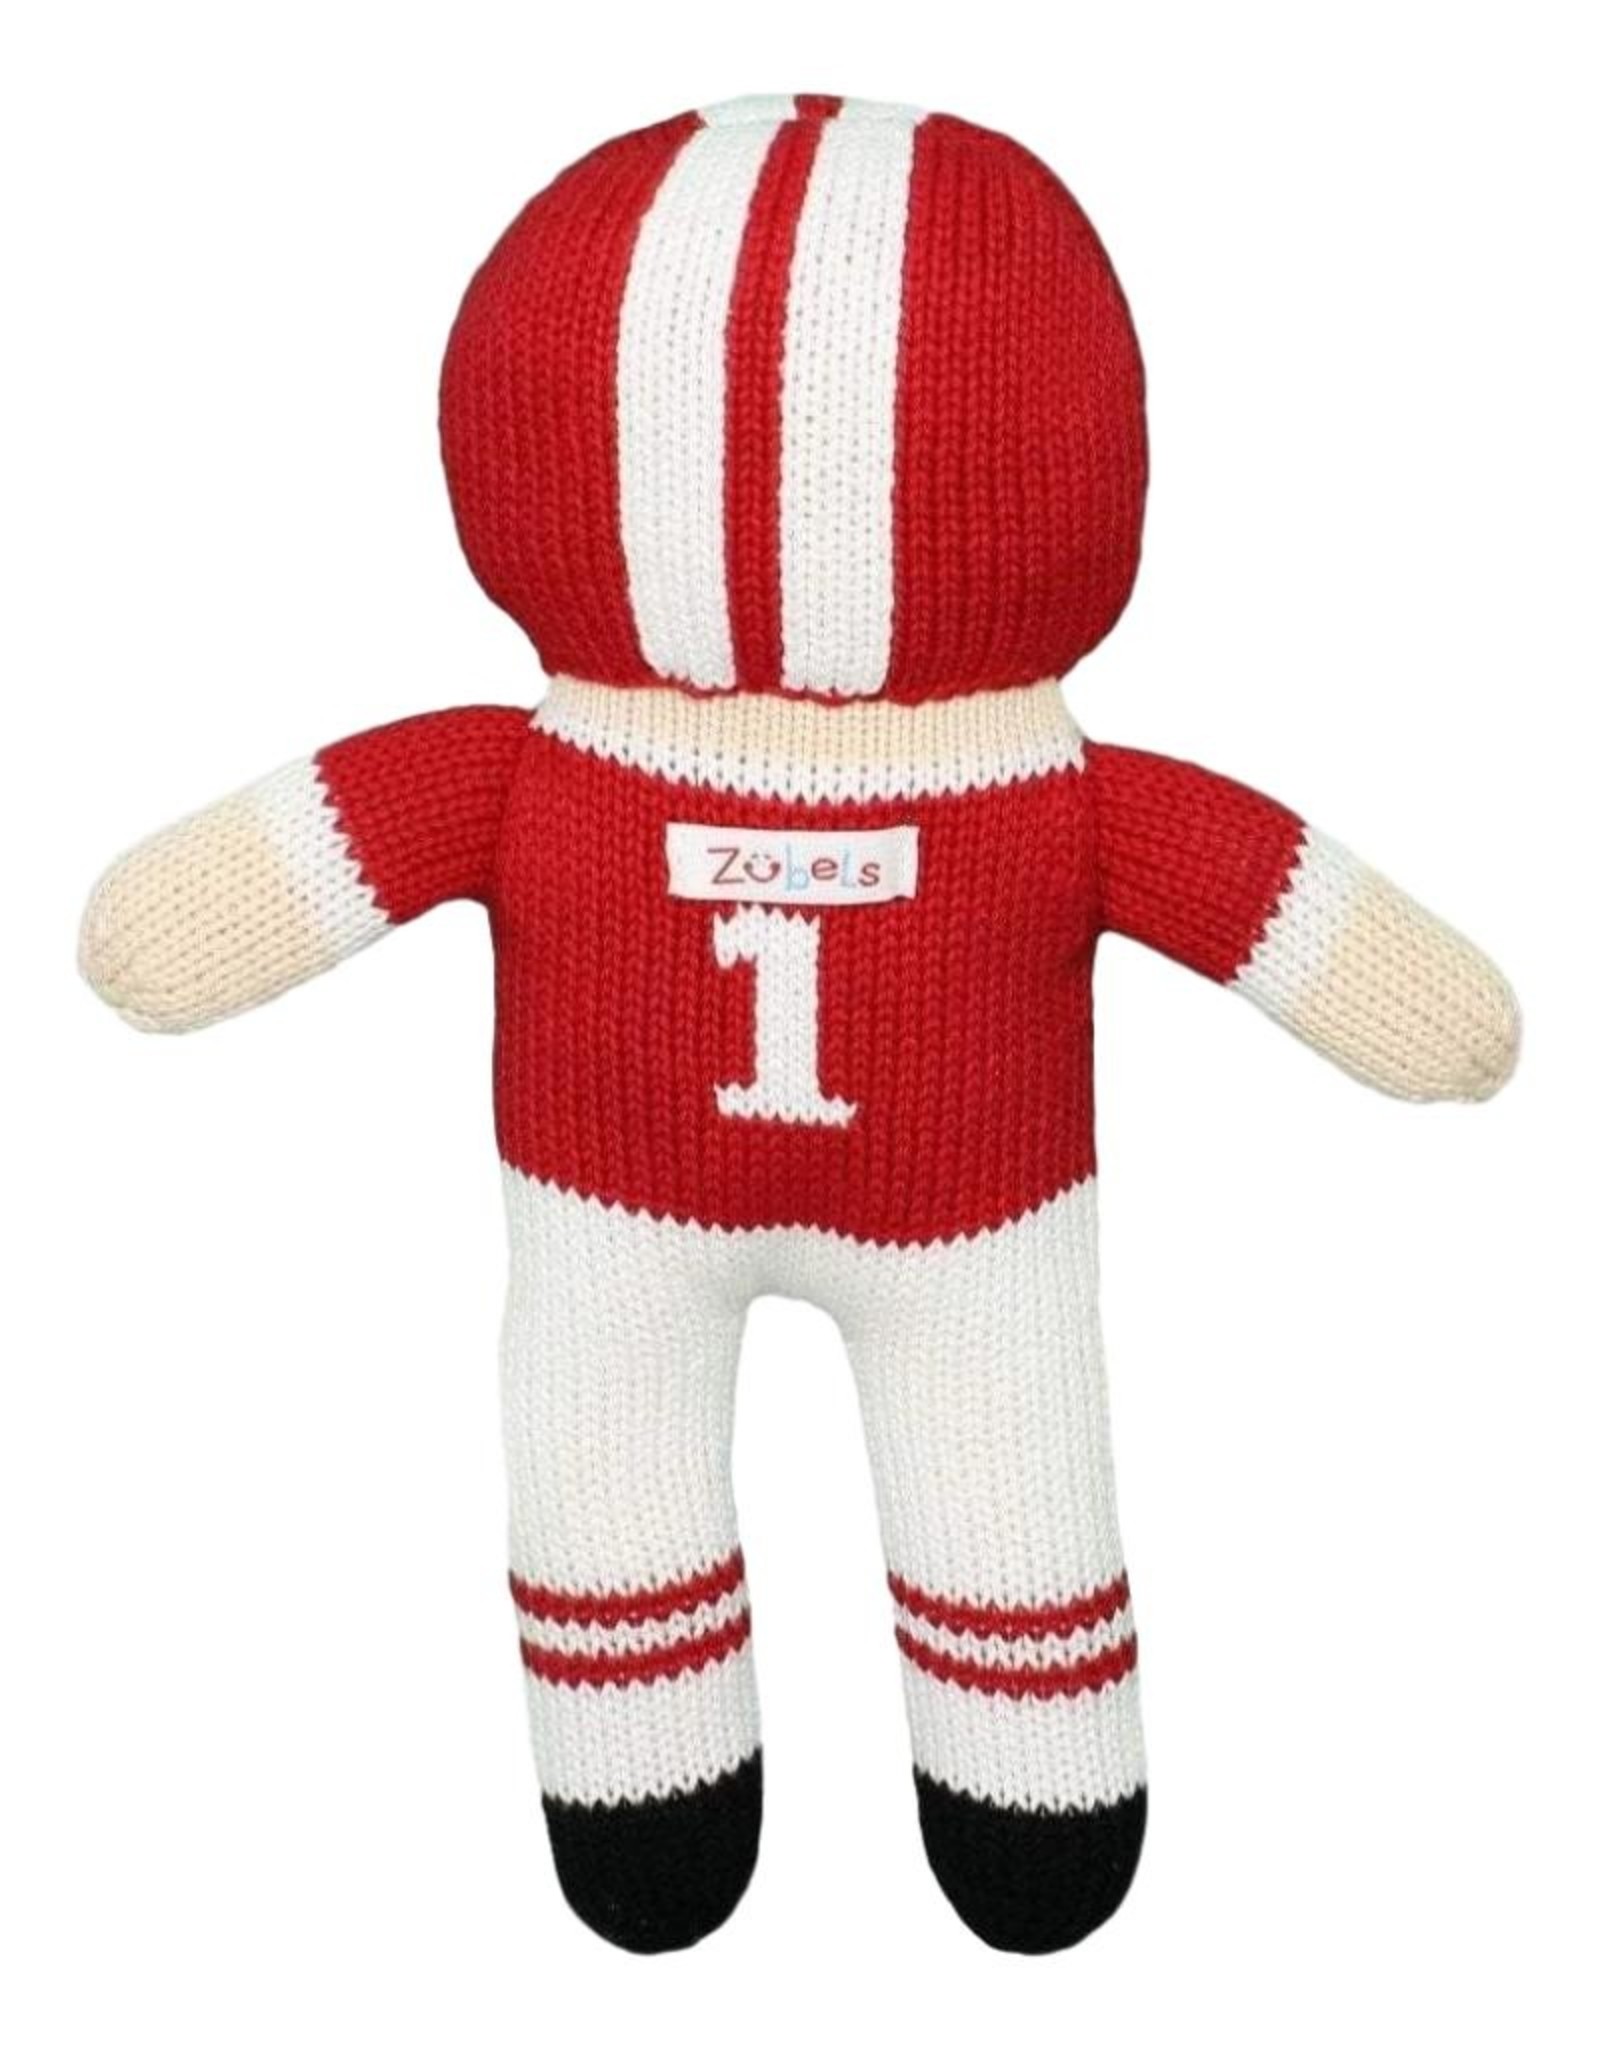 Zubels FP12 Football Player red